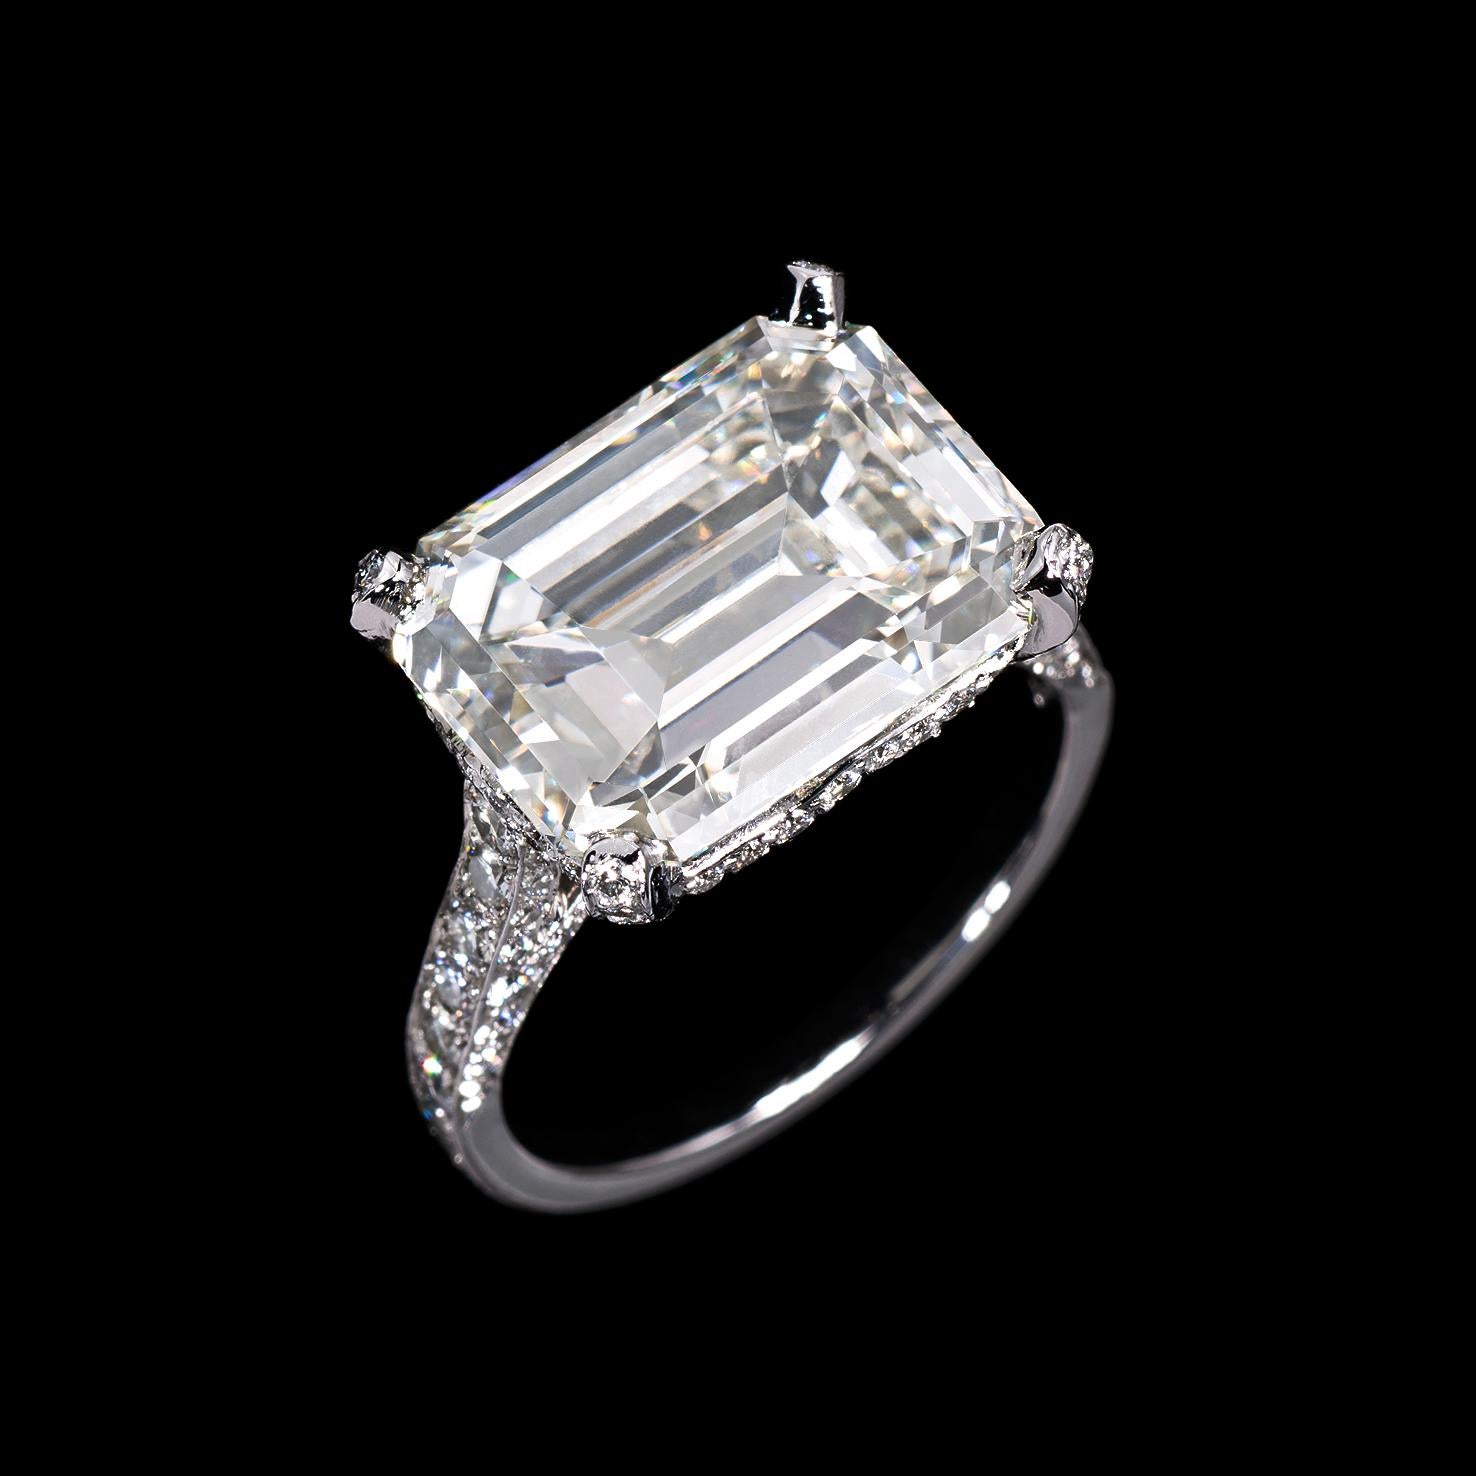 Set with an emerald cut diamond weighing 6.92 carats. Accompanied by a GIA diamond report stating that the diamond is K color, VS1 clarity. Mounted on white gold with pavé diamonds. Made in Switzerland.